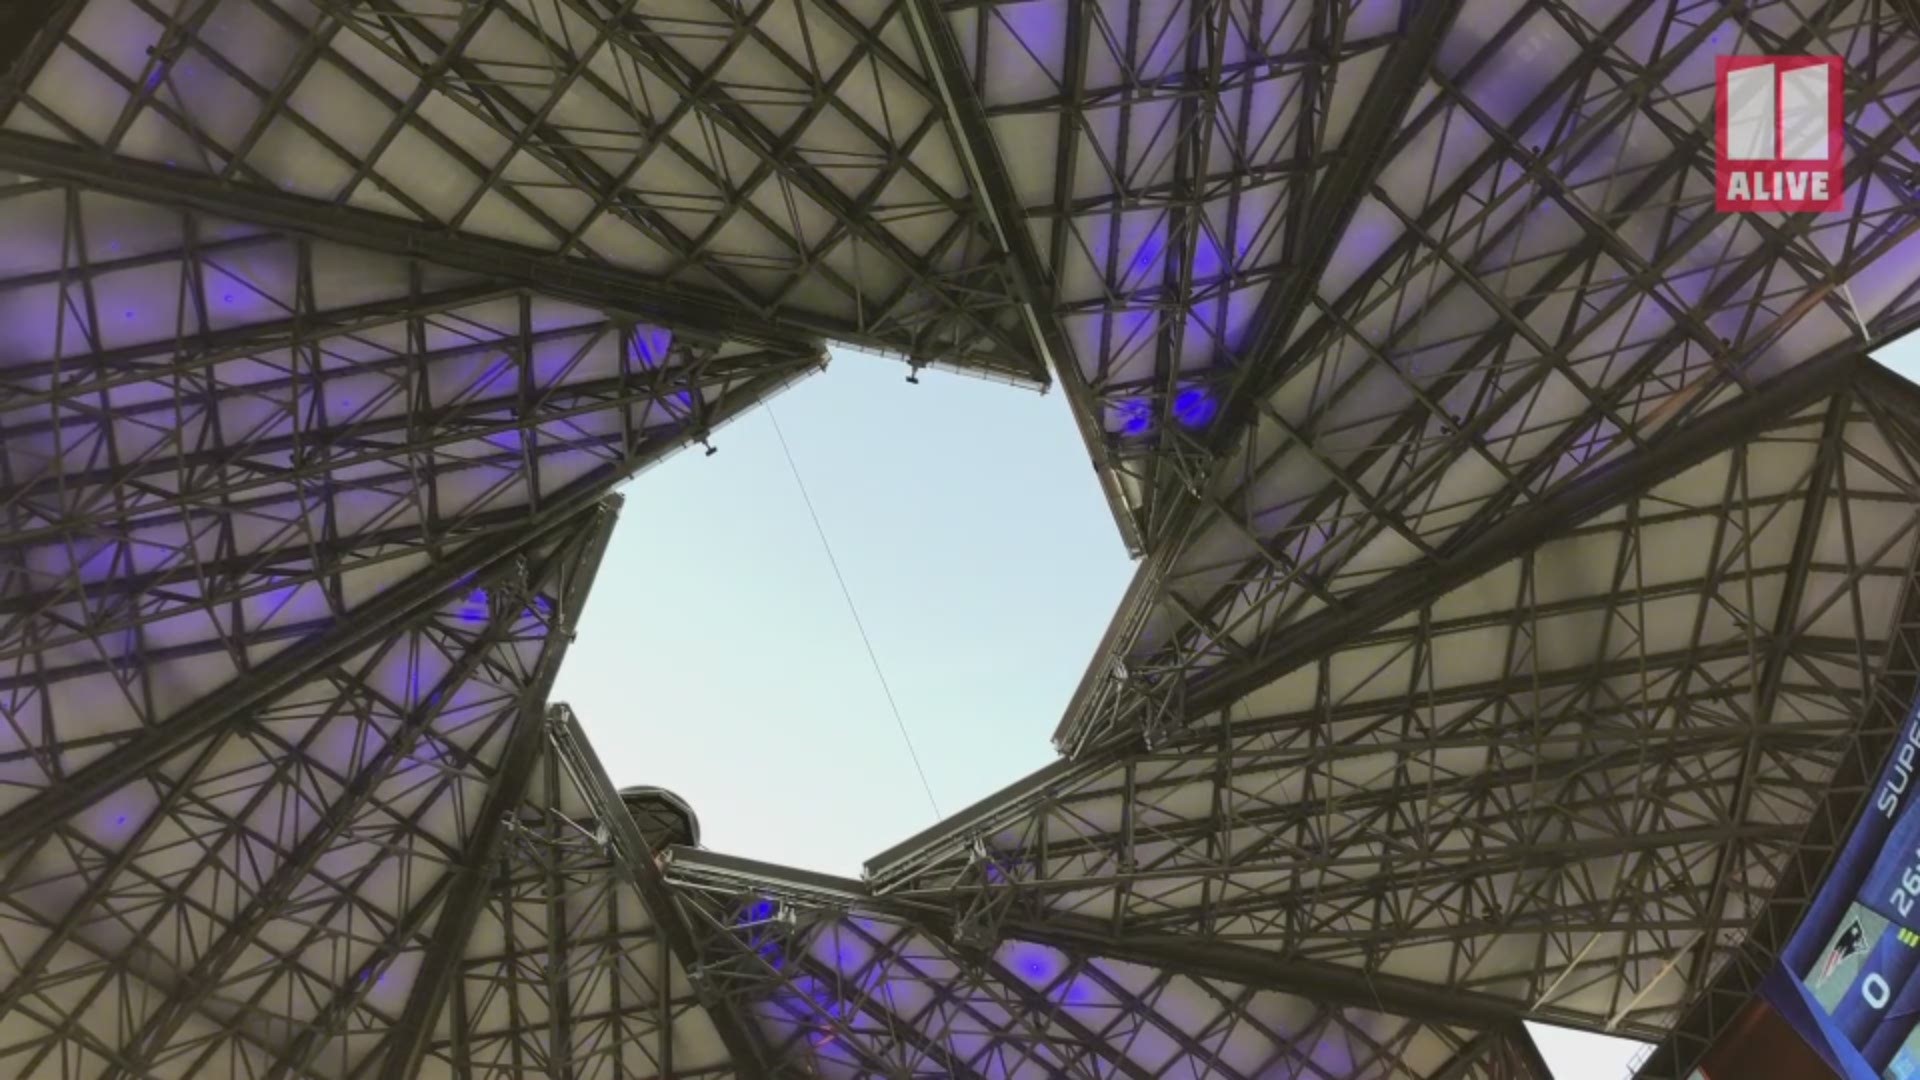 The roof was open for the pre-game festivities for Super Bowl LIII in Atlanta.